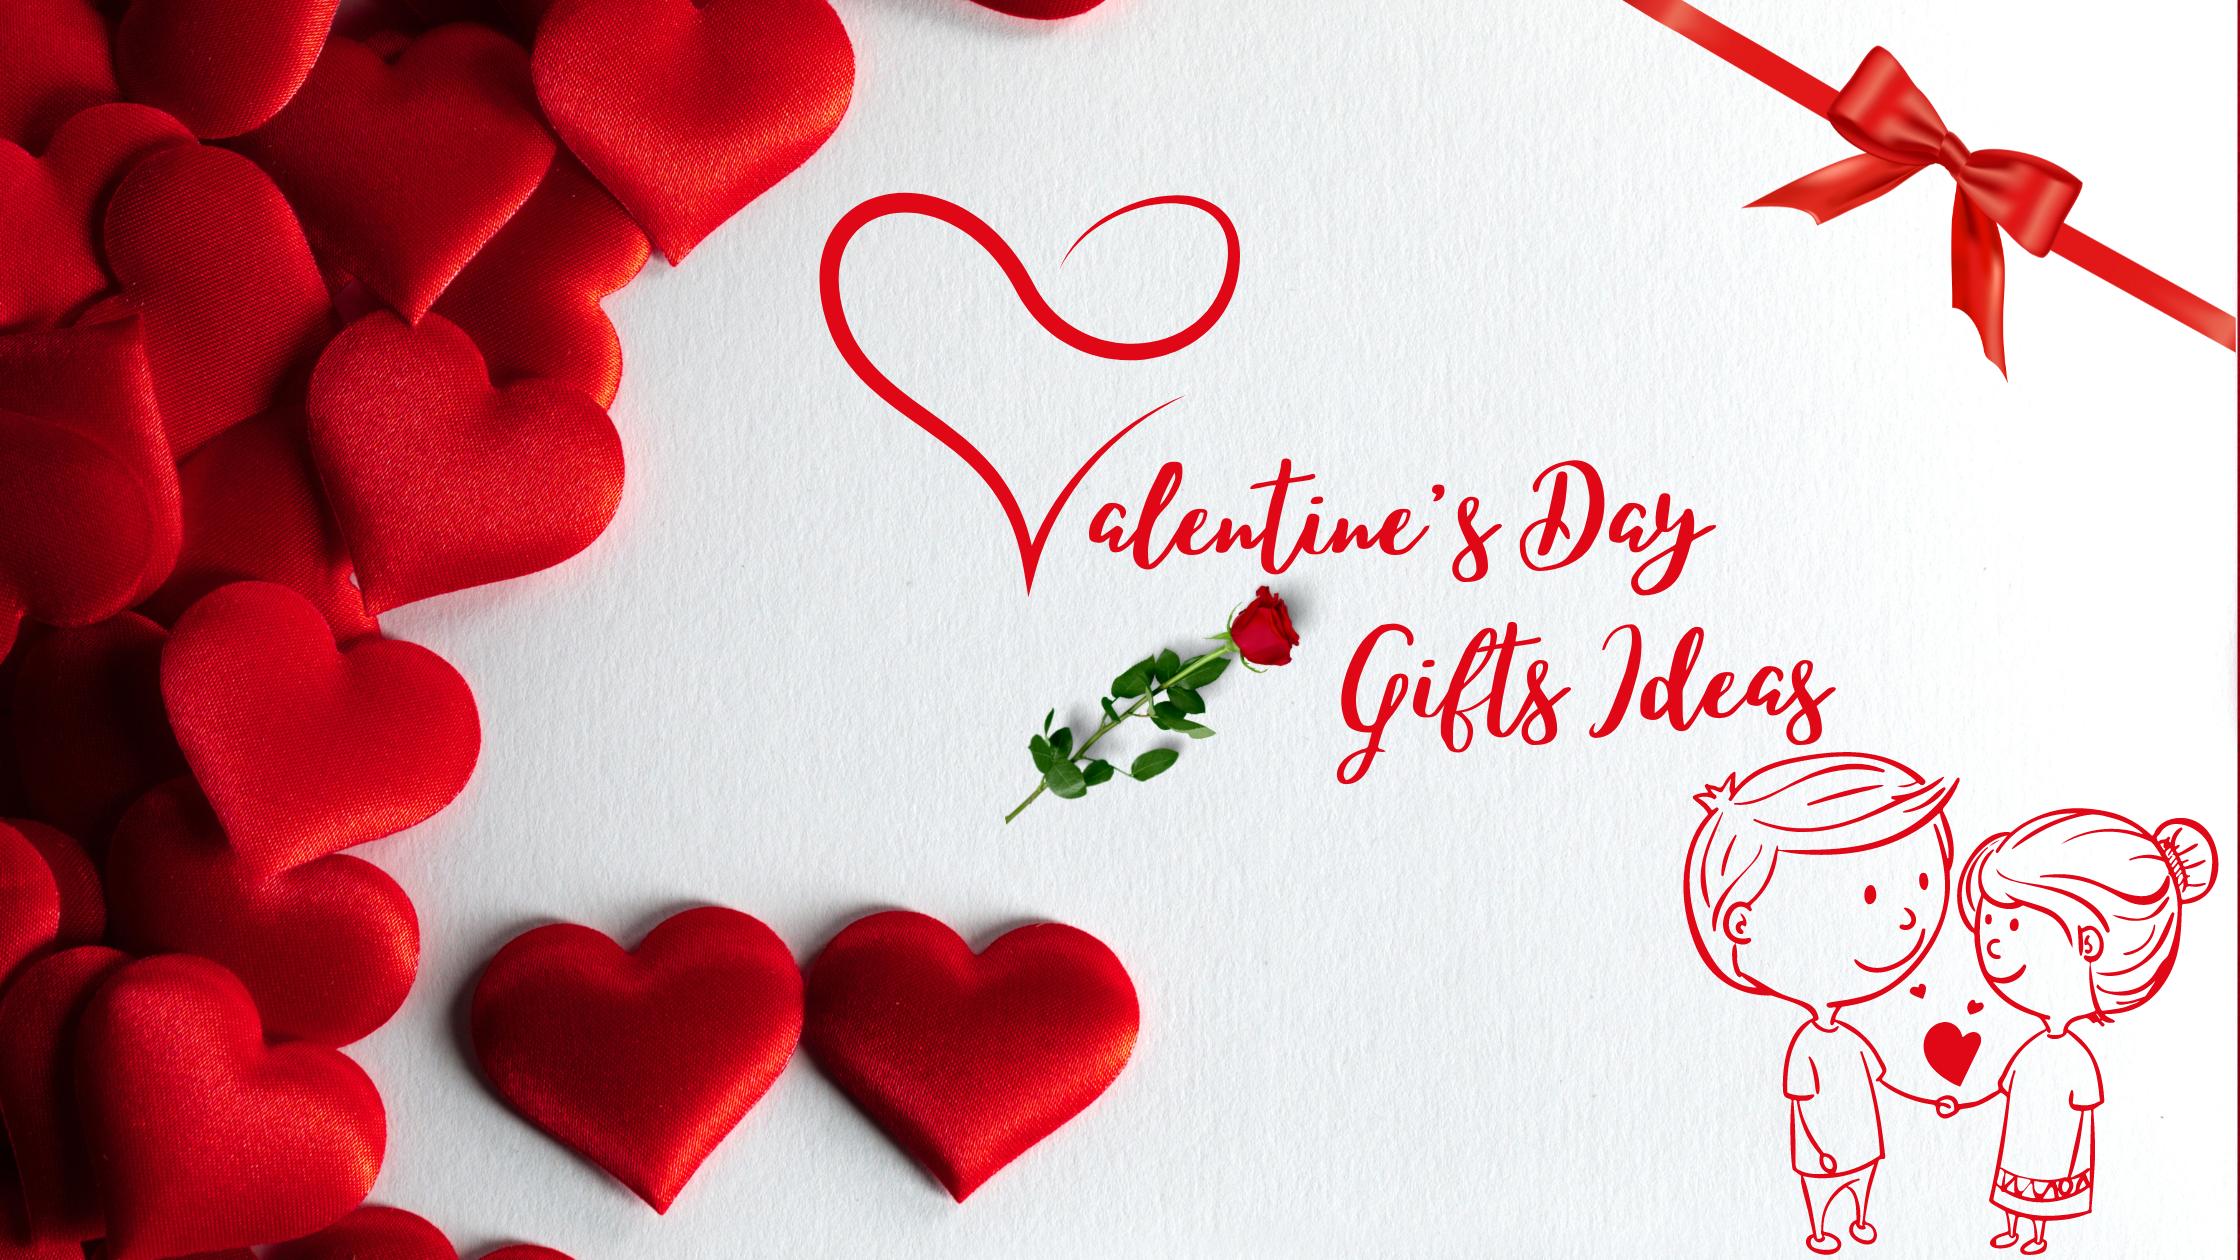 Valentine’s Day Gifts Ideas for Your Significant Other